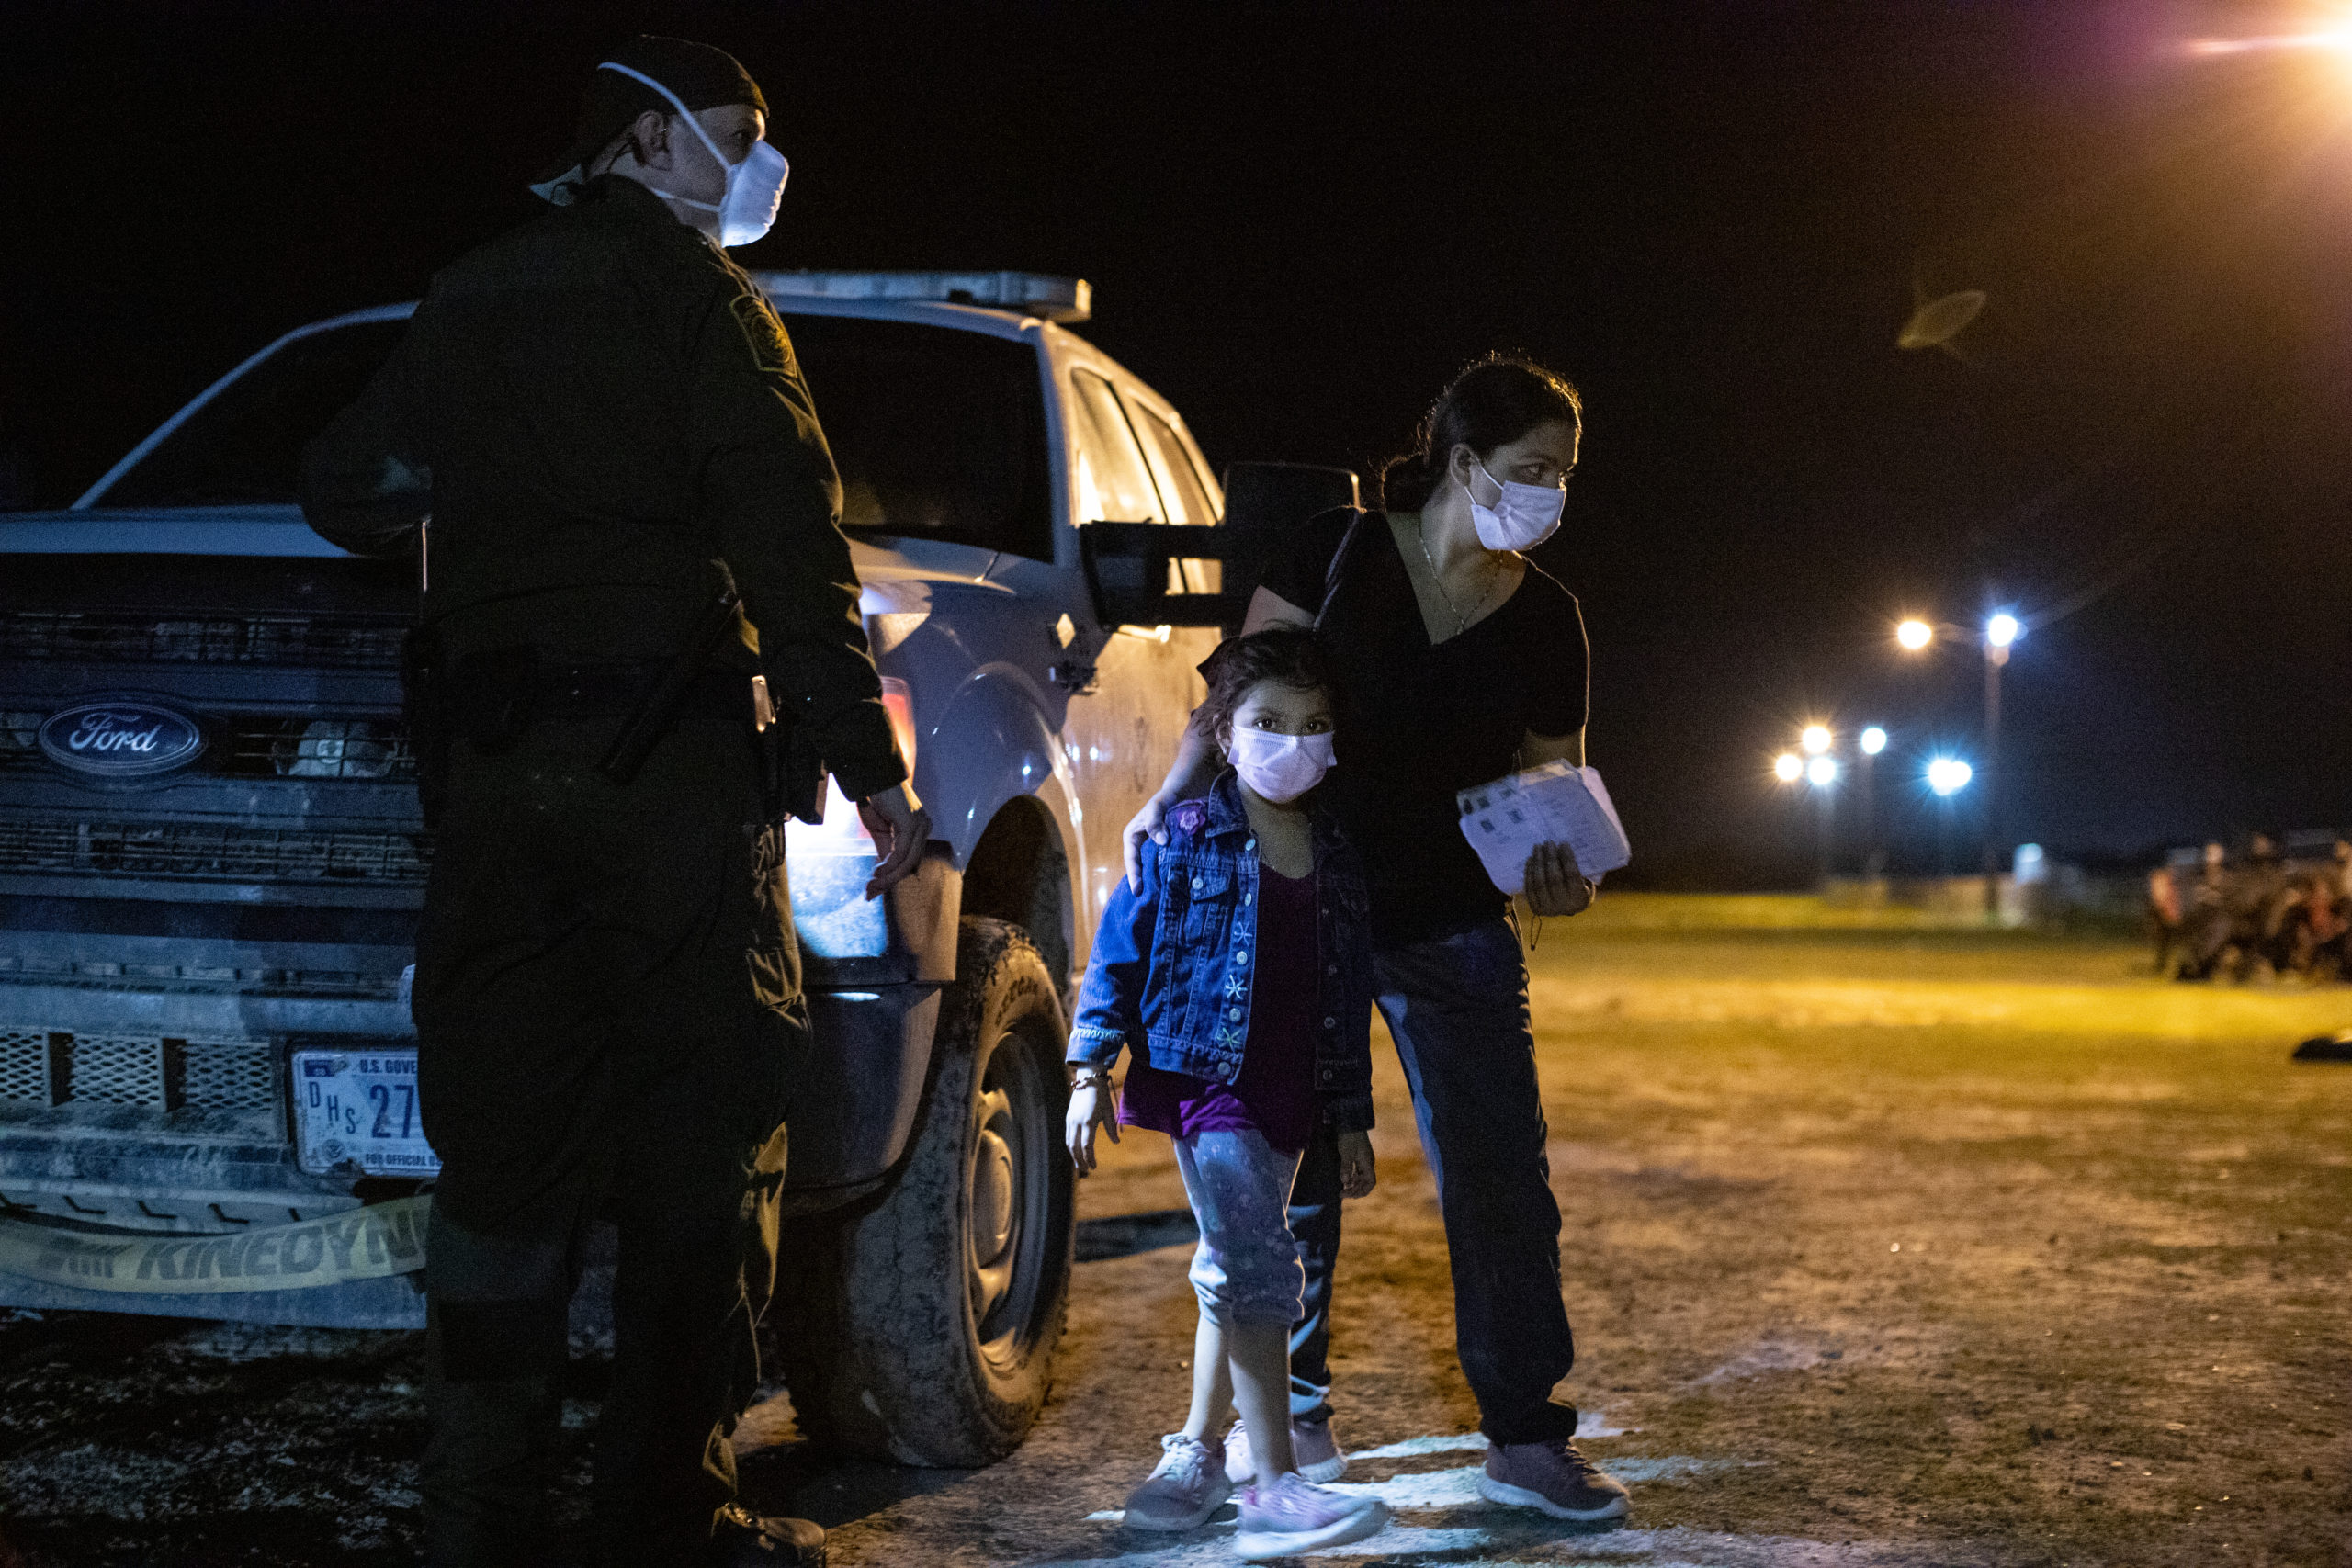 Migrants turned themselves in to Customs and Border Protection officials to be processed in hopes of applying for asylum near La Joya, Texas, on August 7, 2021. (Kaylee Greenlee - Daily Caller News Foundation)